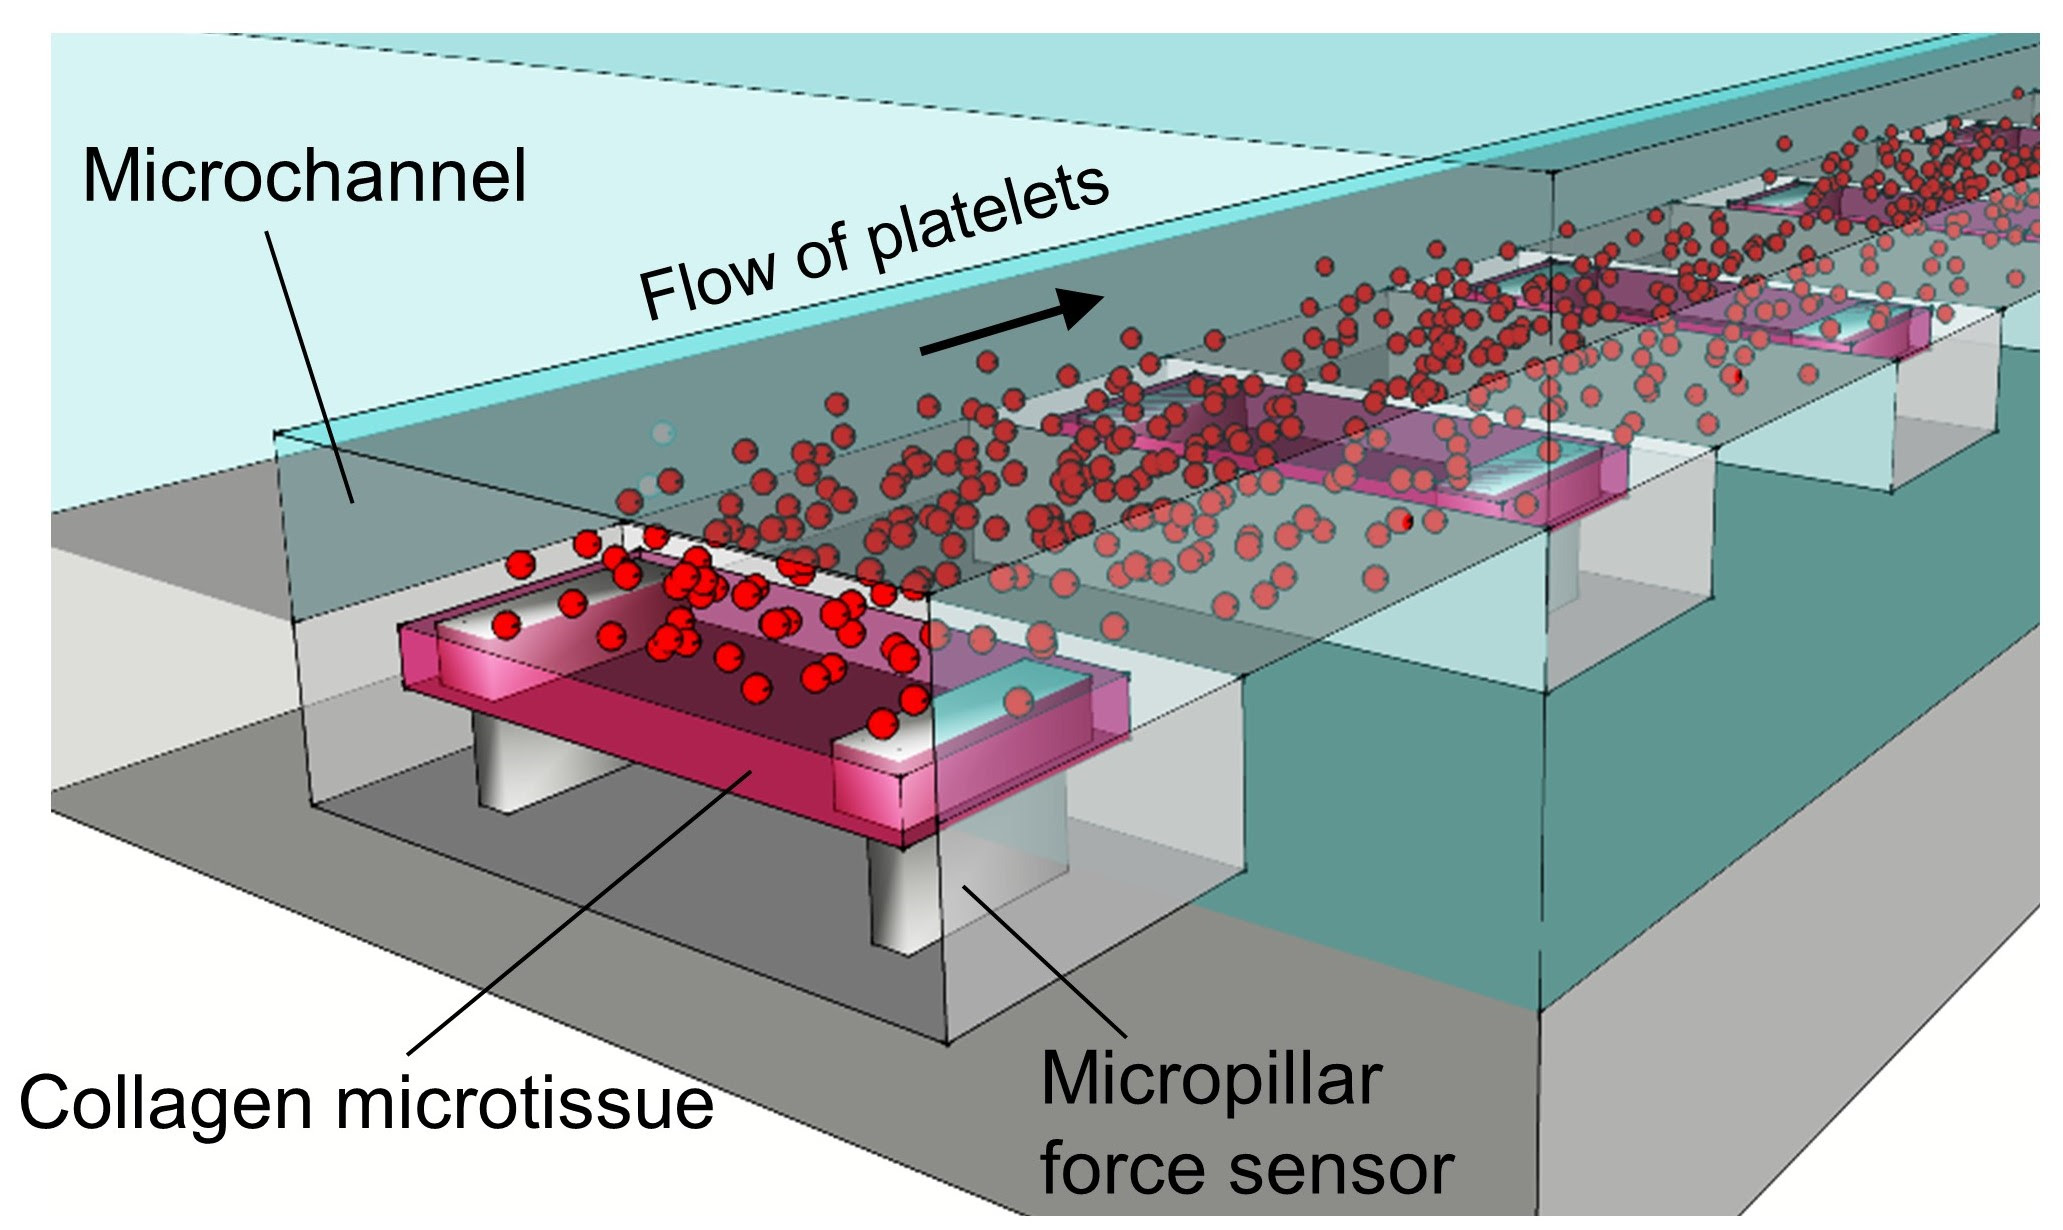 How do clots become firm in the presence of blood flow? A new